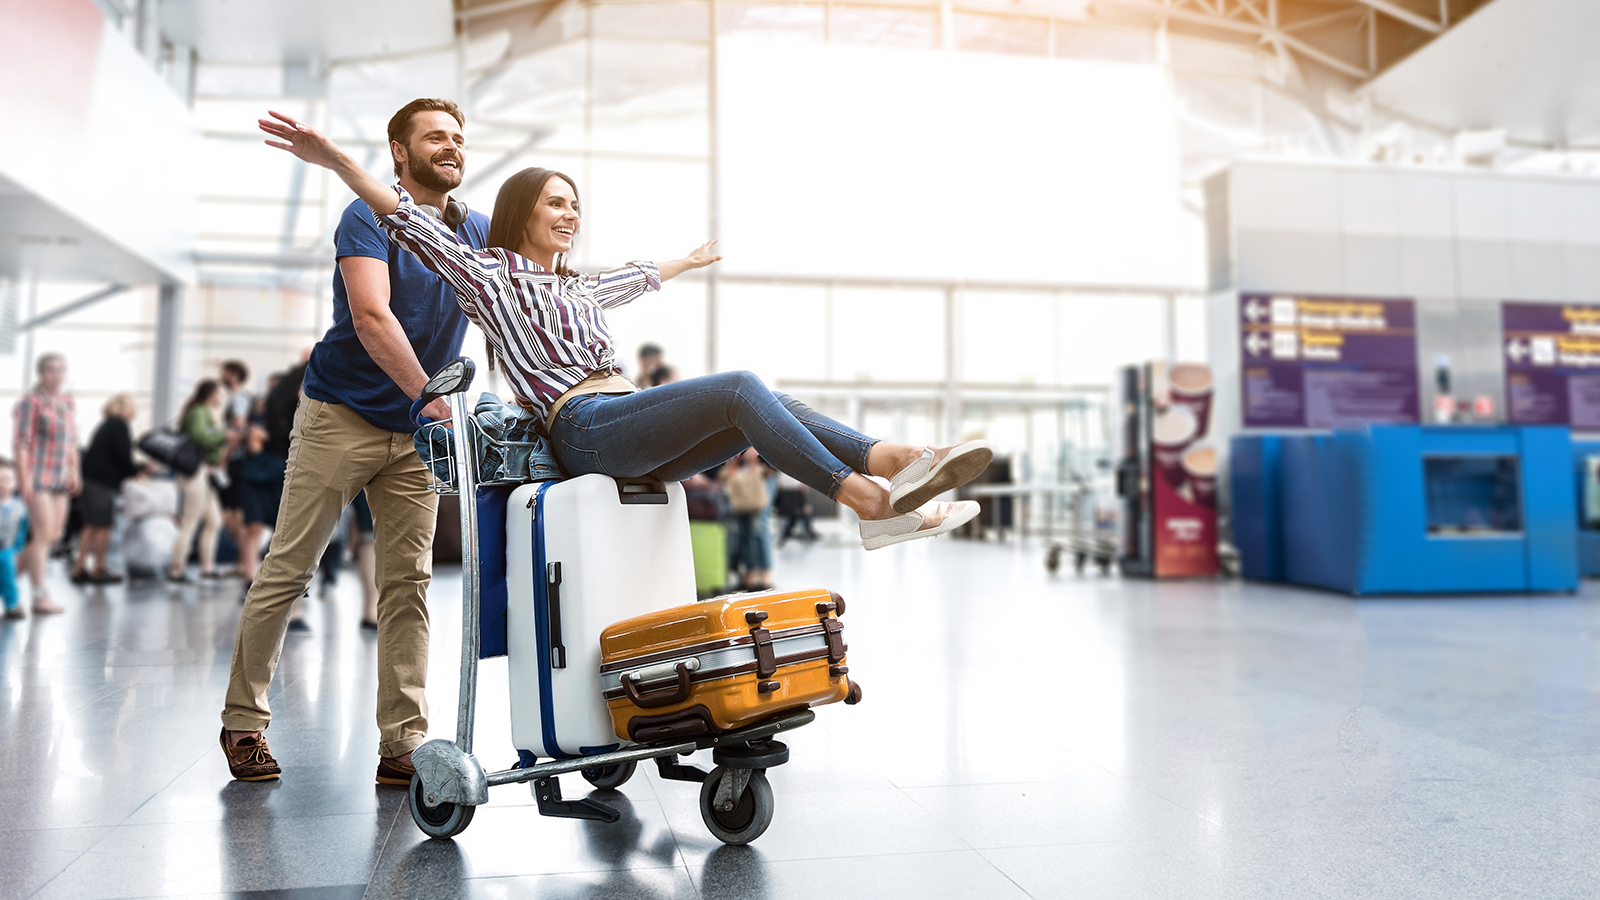 I believe I can fly. Cheerful woman is sitting on baggage and man pulling cart forward. They looking ahead with joyous smile. Copy space on right side